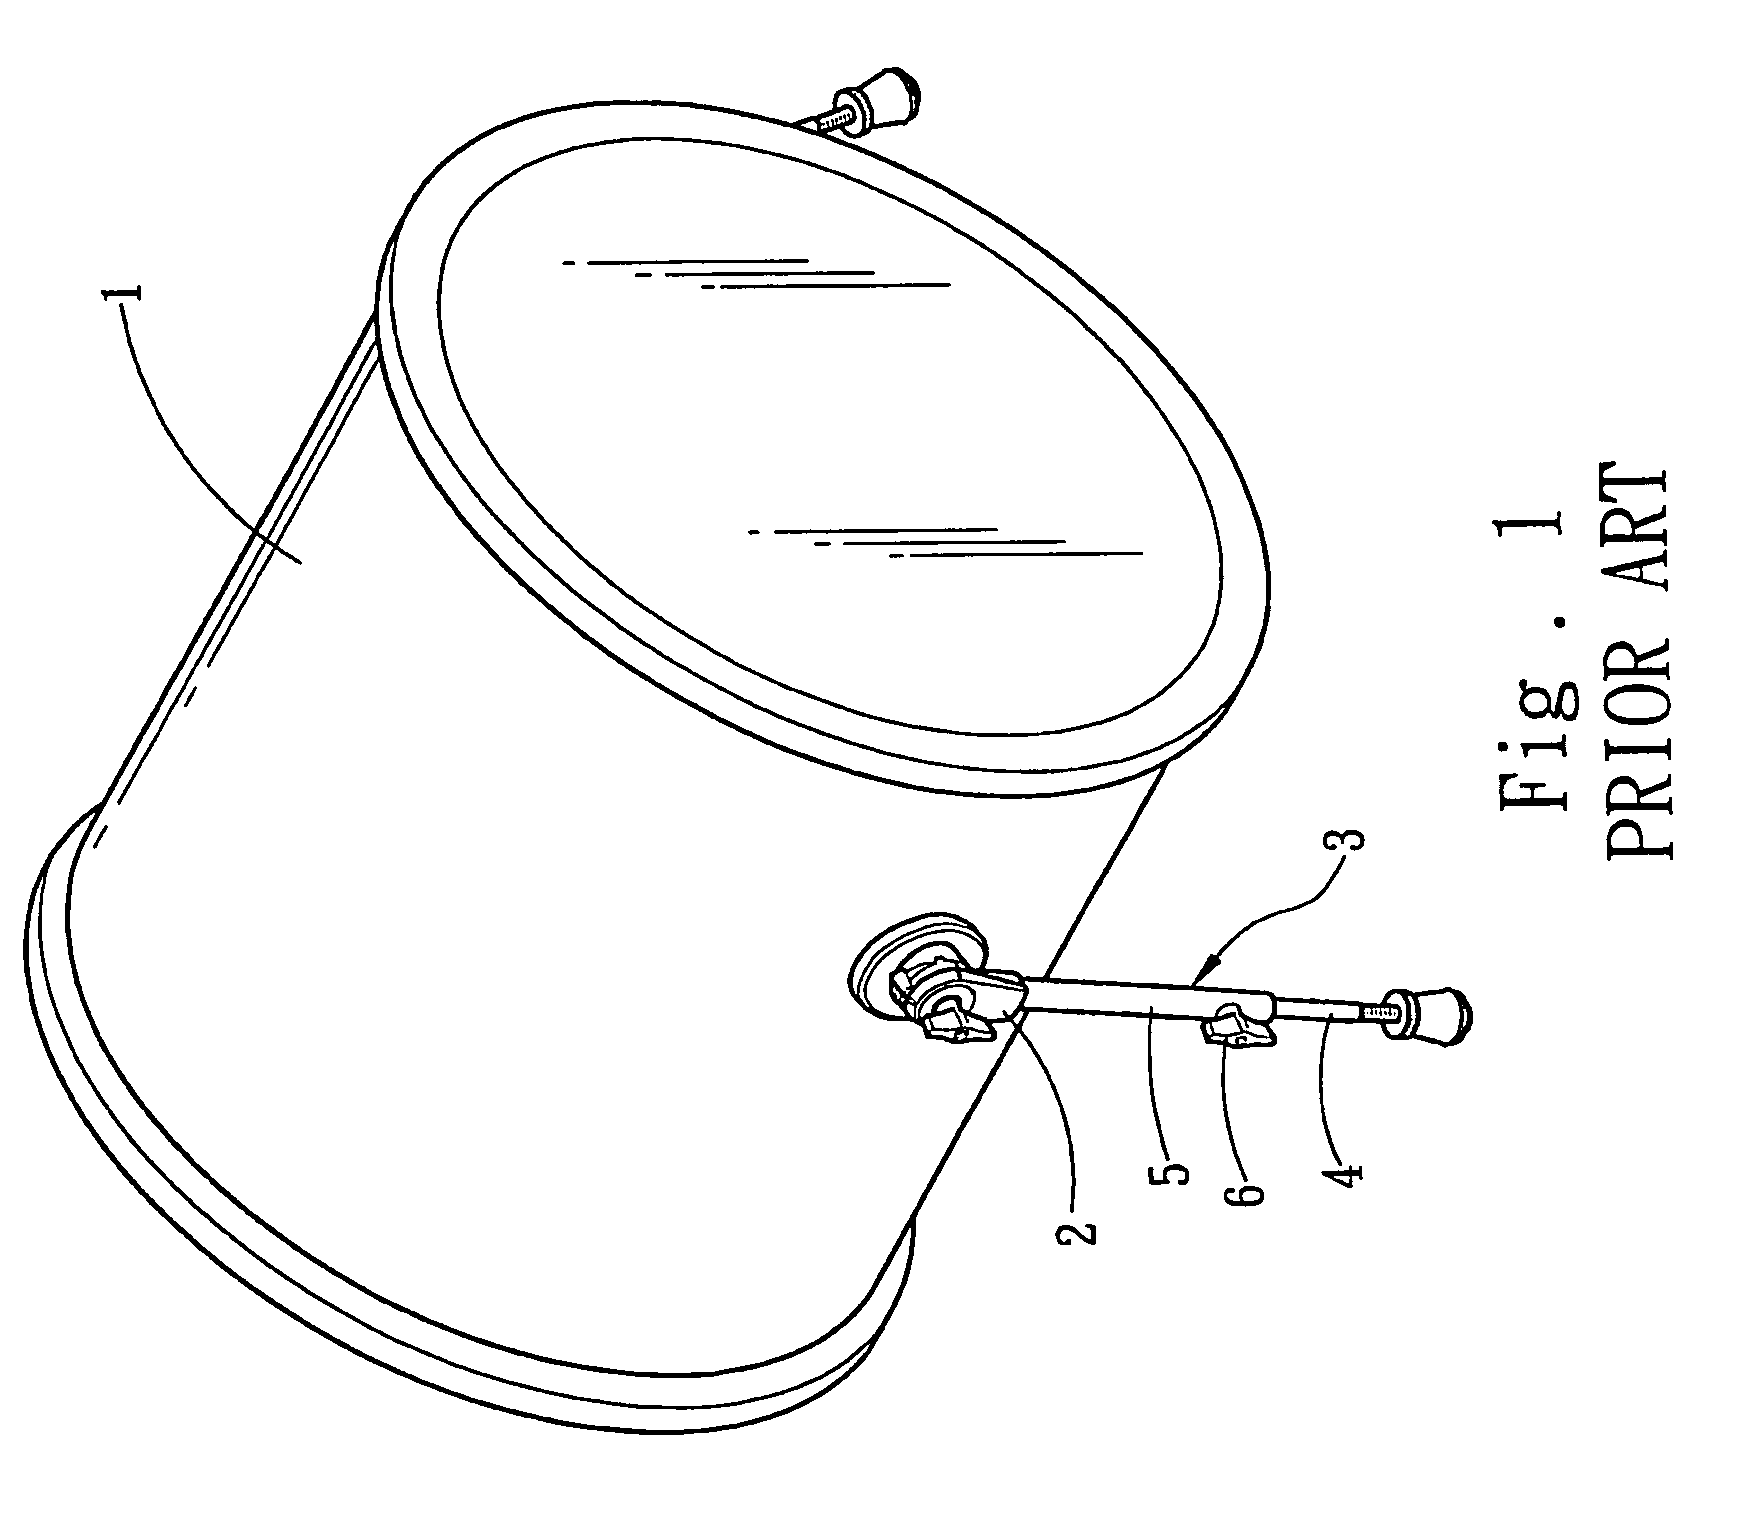 Anchoring structure for telescopic tubes of drum sets